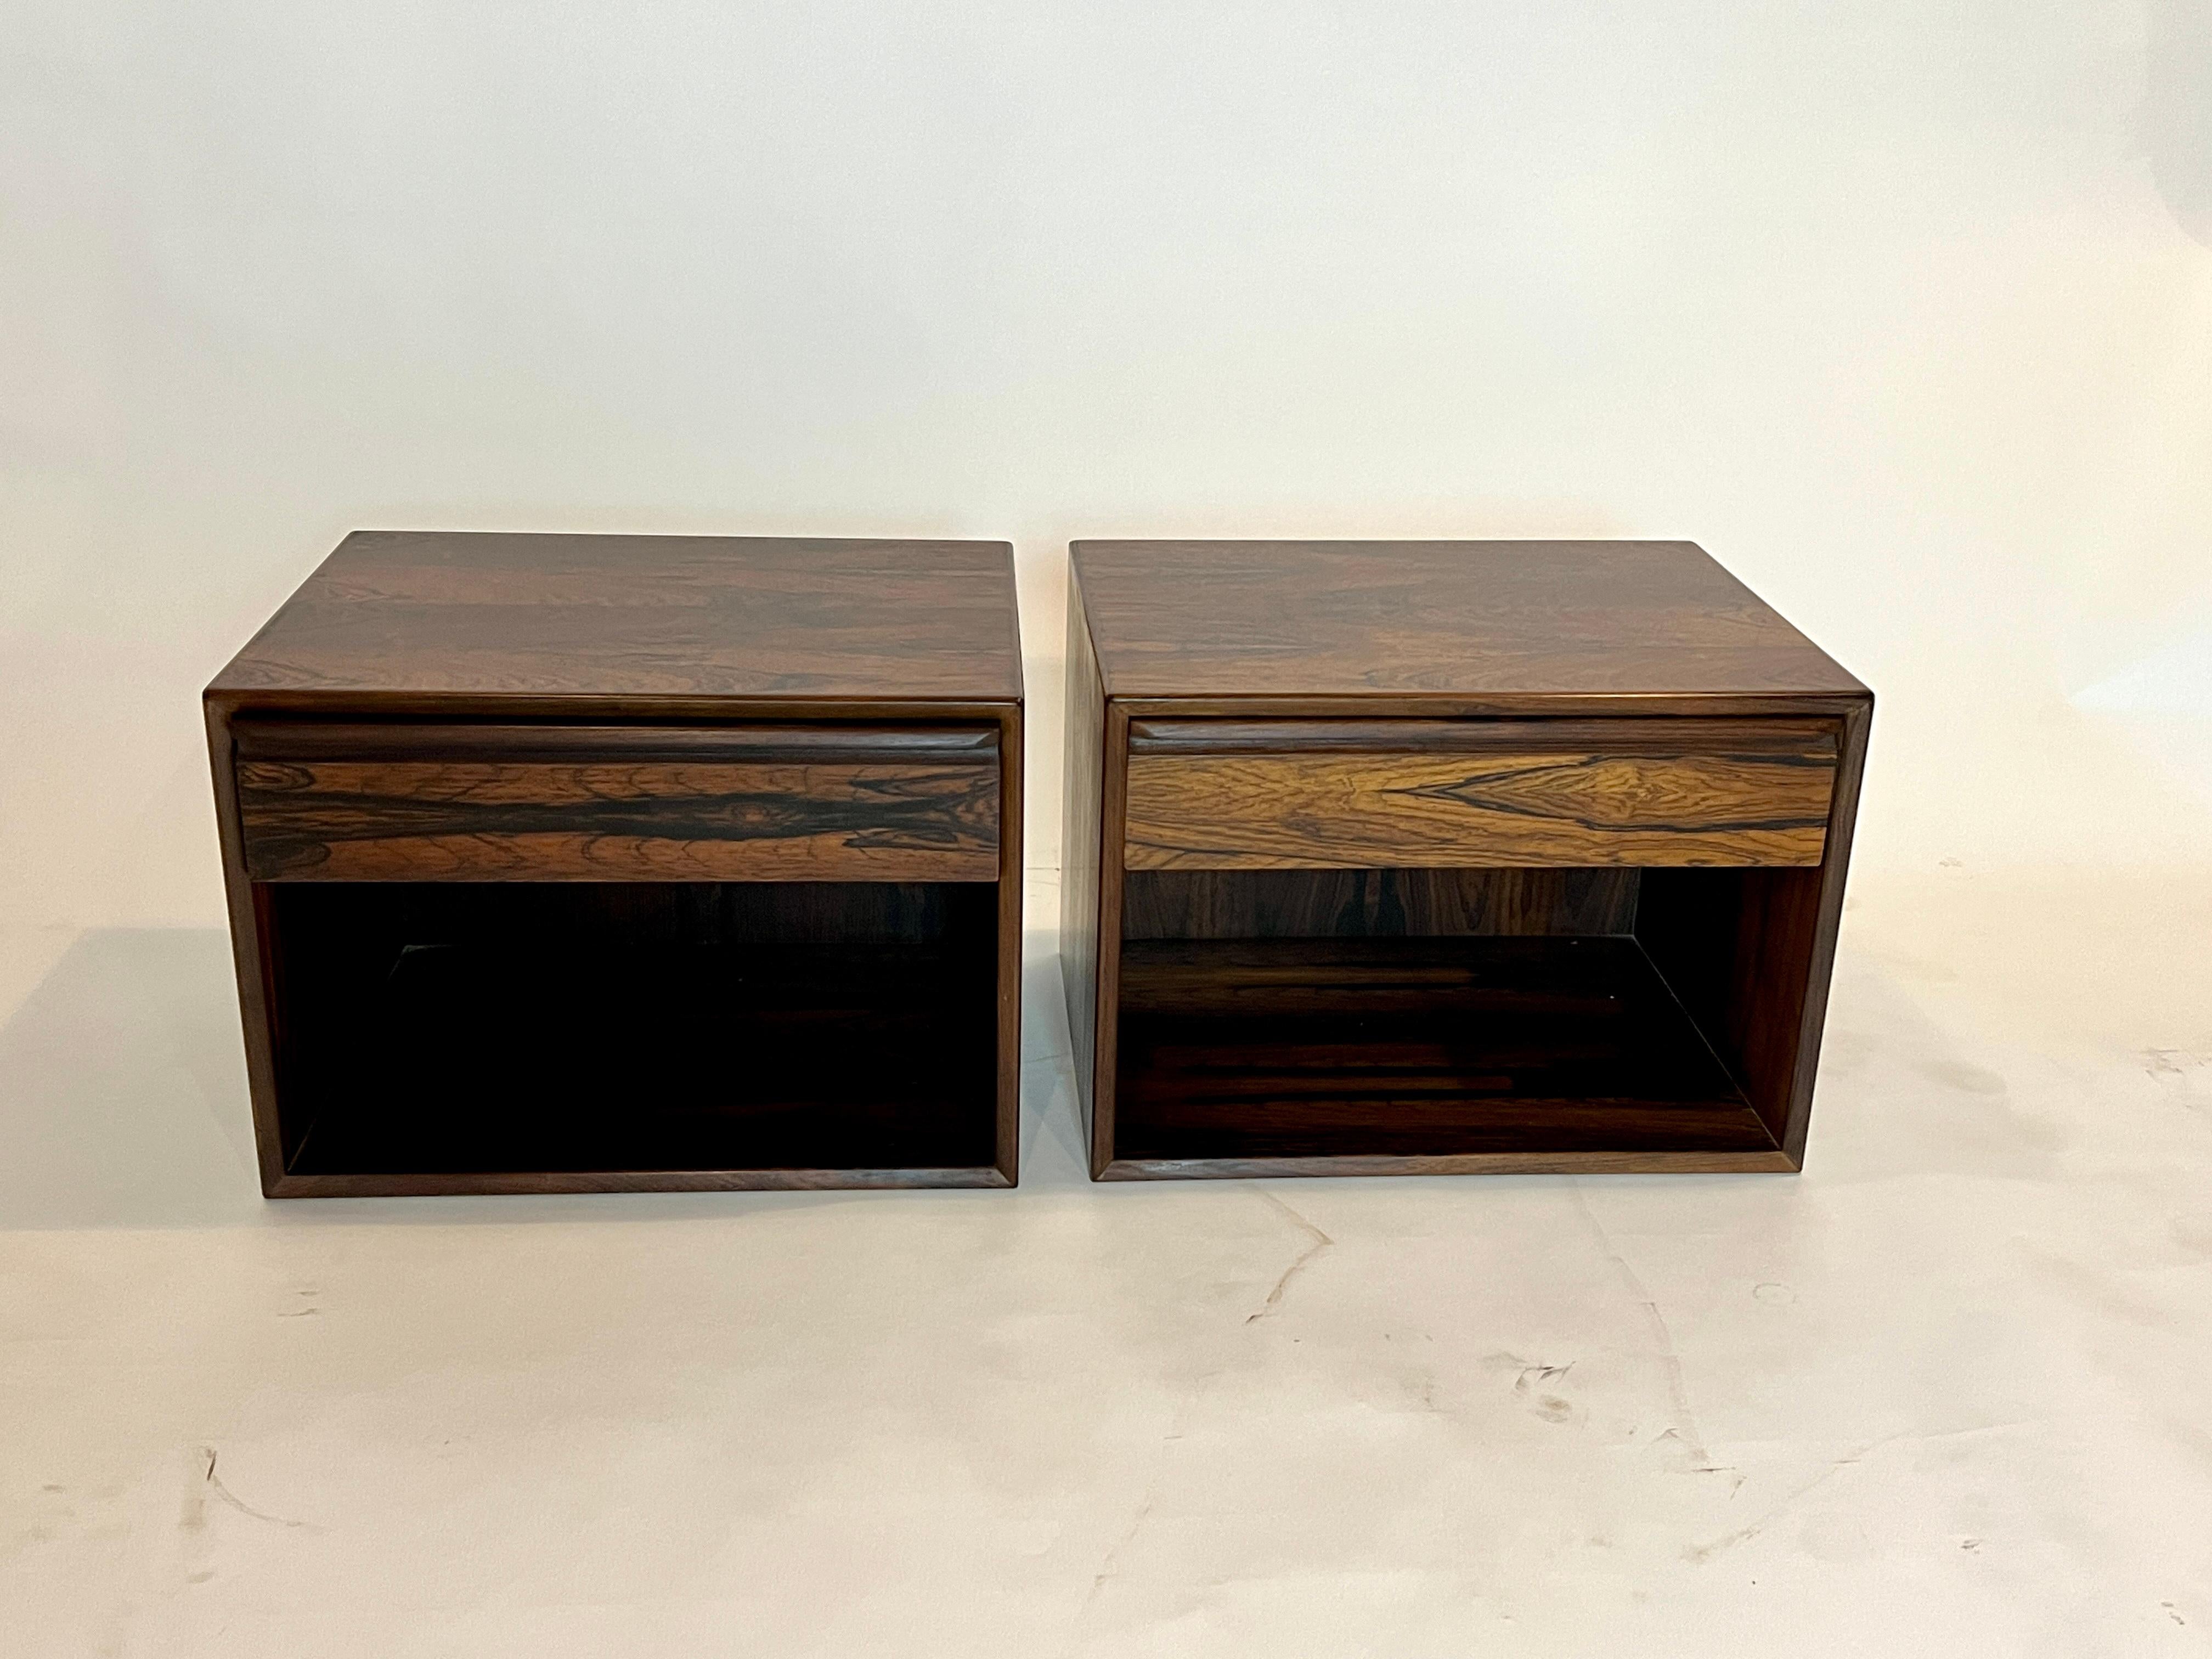 Pair of rosewood wall mount nightstands by Westnofa, Norway 1960's. Each cabinet is crafted of rosewood inside and out with one pull out drawer and an open cabinet for storage. These cabinets can sit on the floor to accommodate a low platform bed or